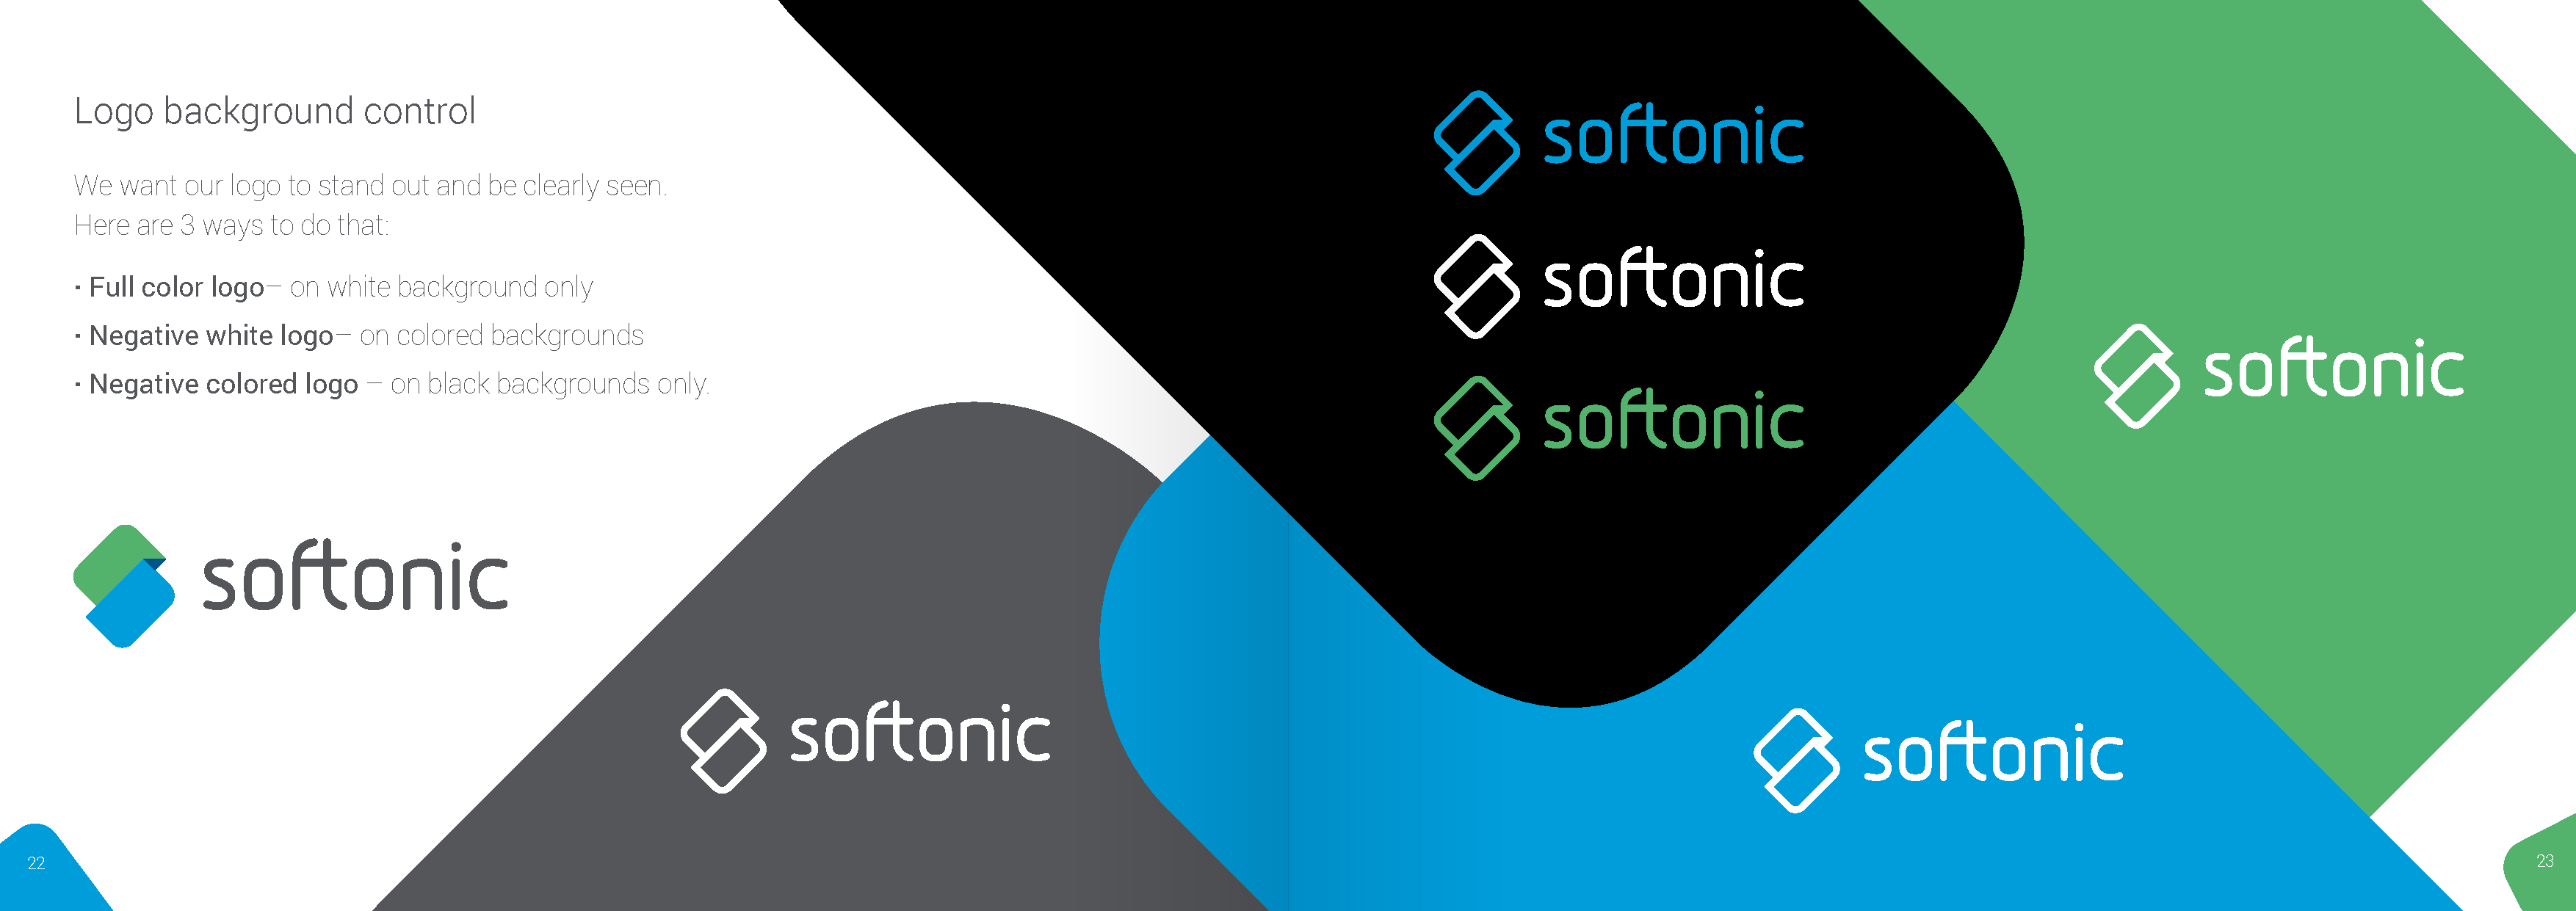 Softonic-Brand-Guidelines_Page_12